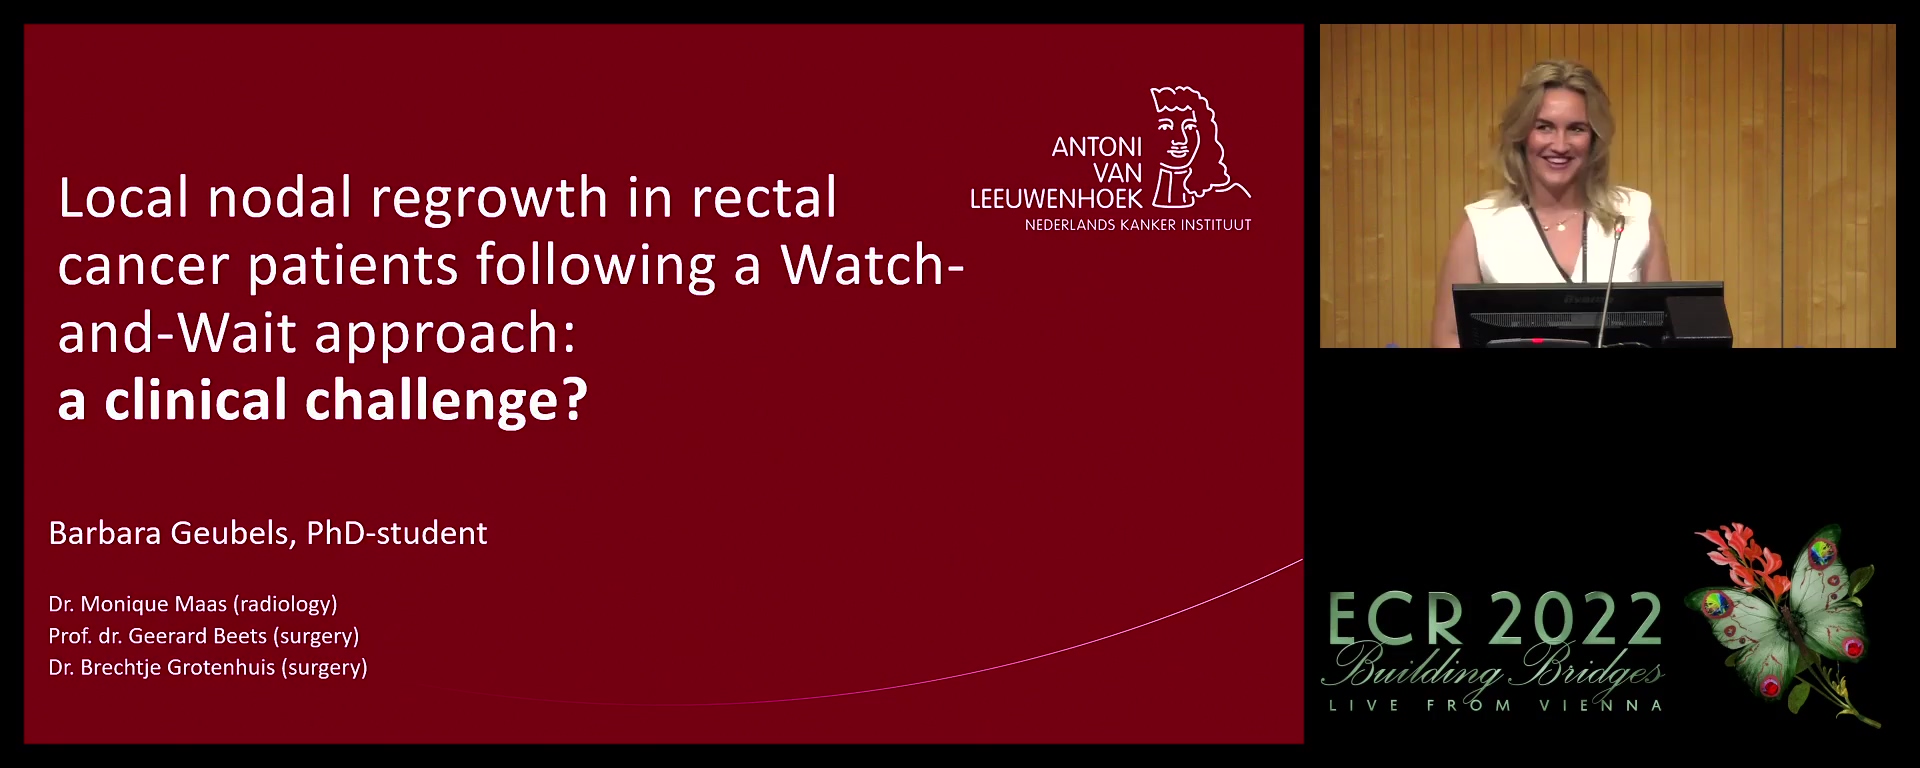 Locoregional nodal regrowth in rectal cancer patients following a Watch-and-Wait approach: a clinical challenge? - Barbara Geubels, Amsterdam / NL